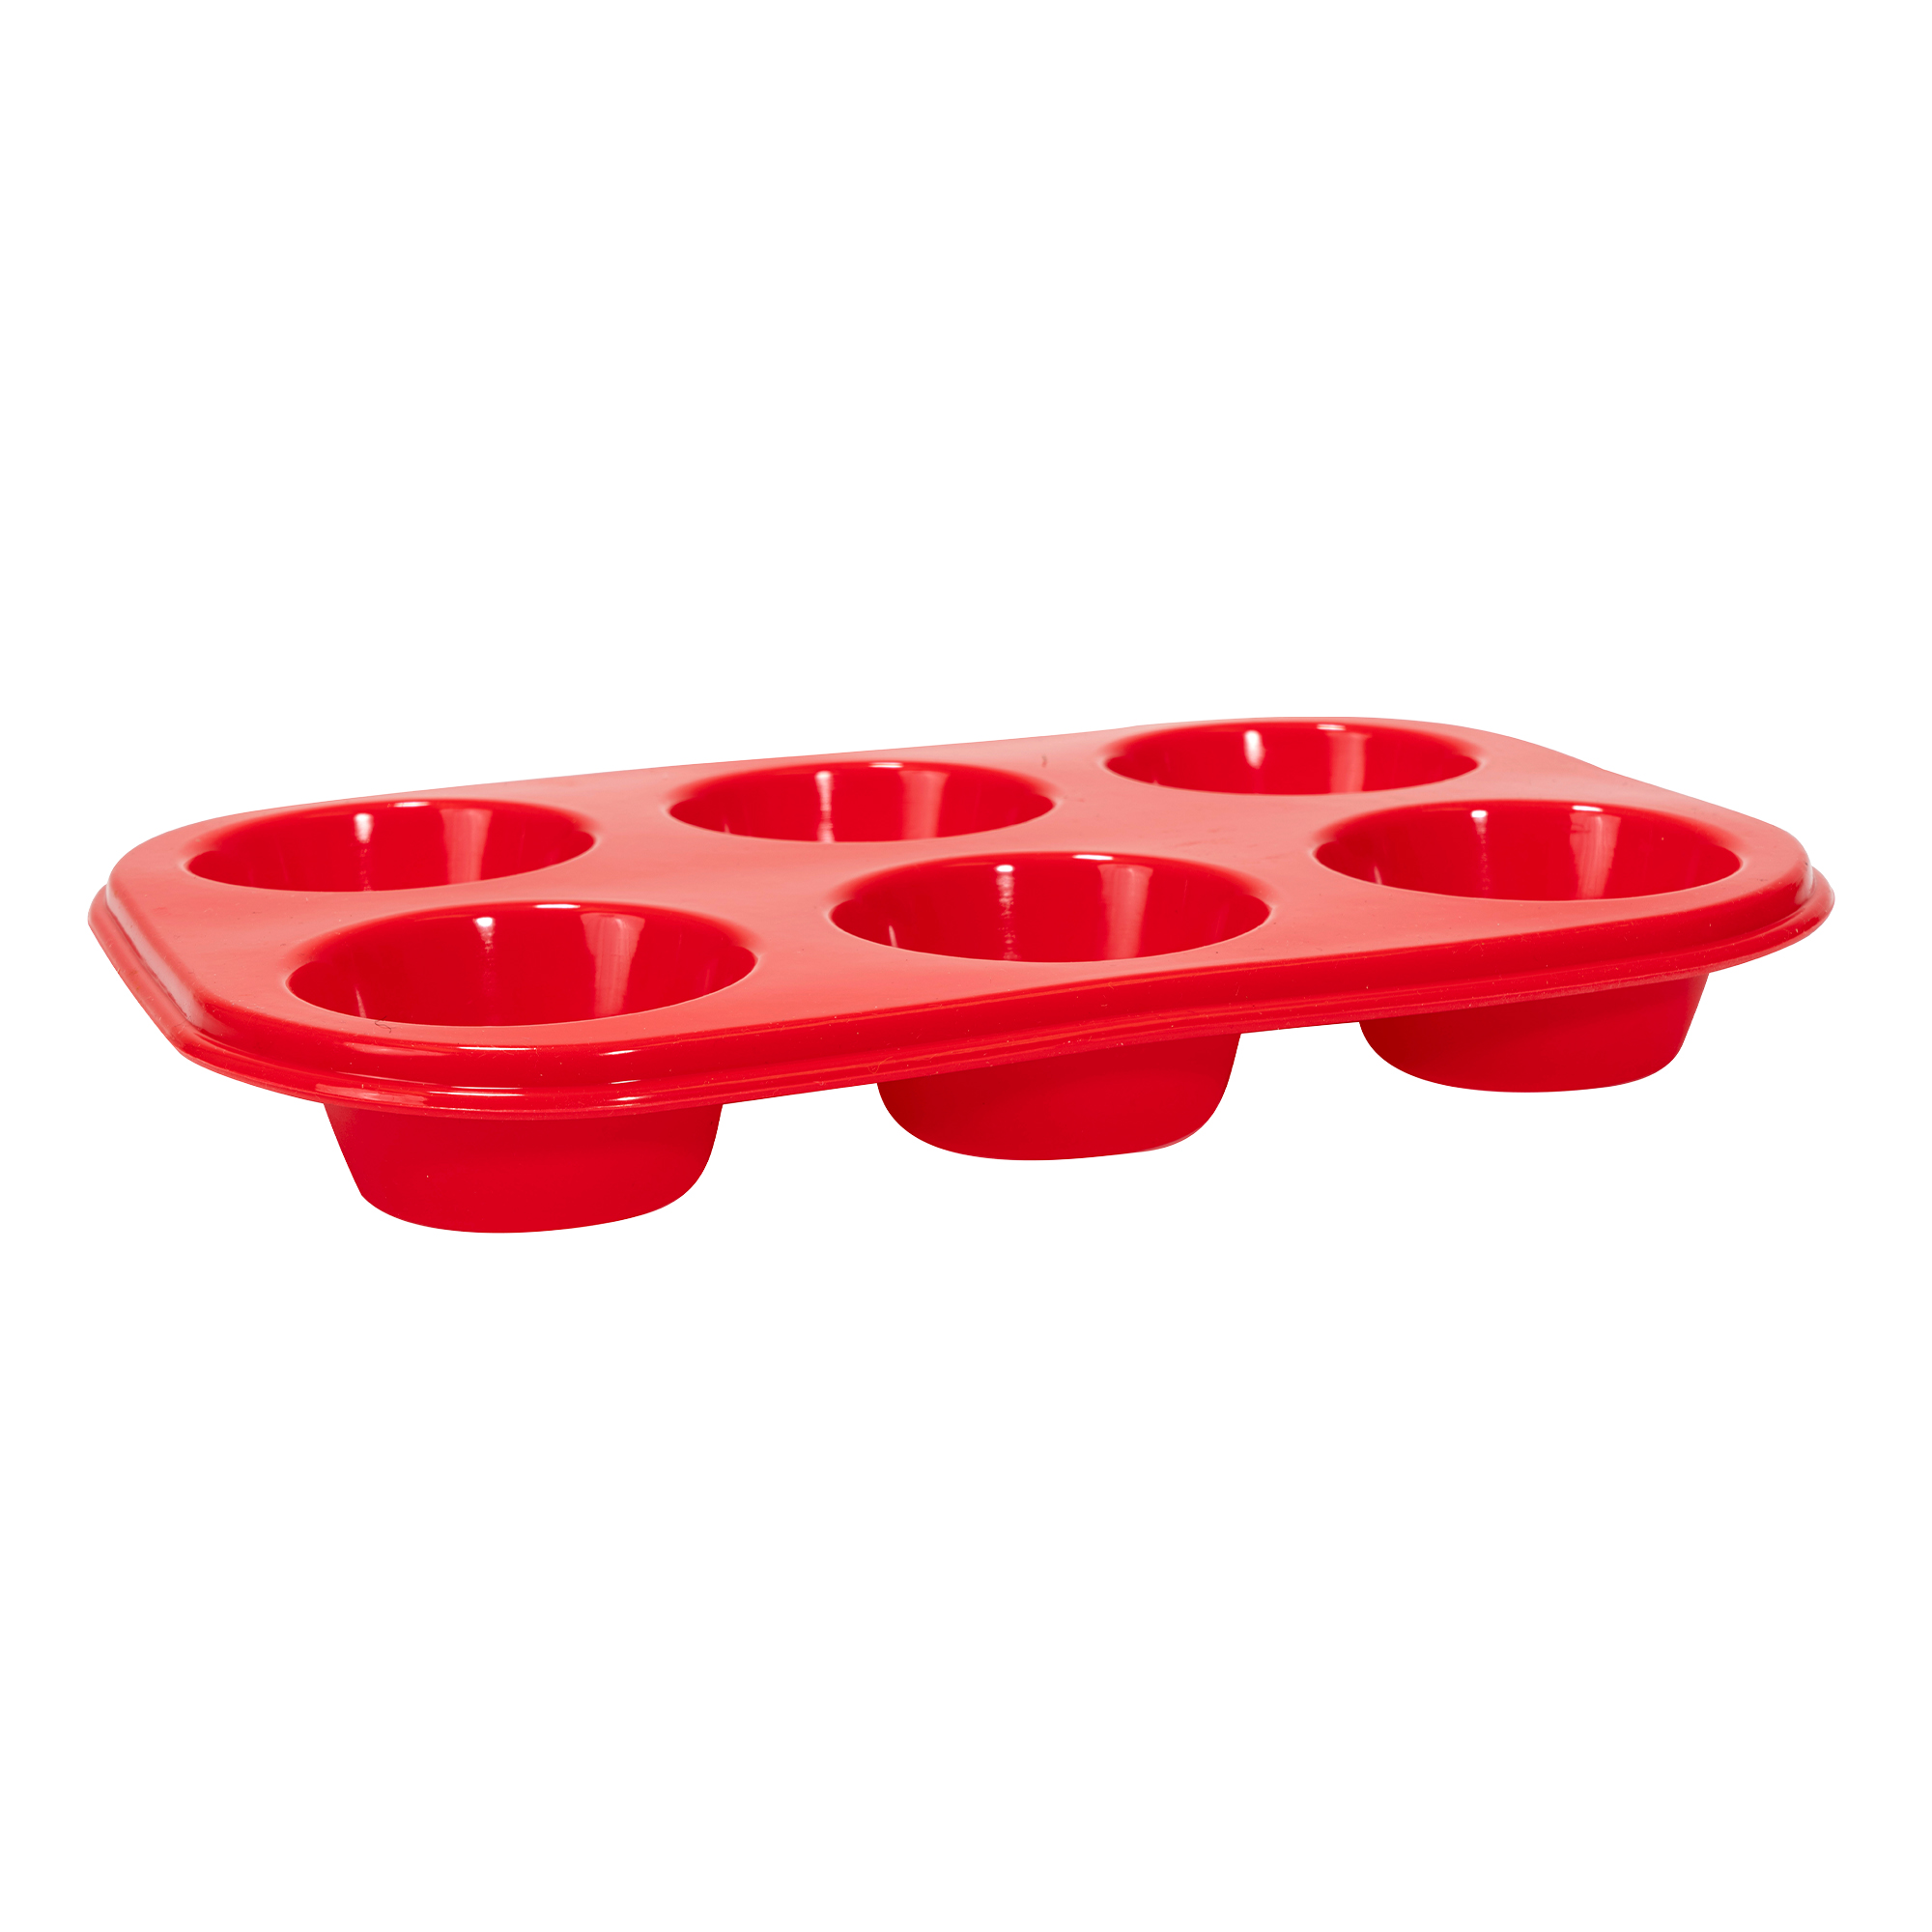 Silicone 6 Cup Muffin Pan Mold - Red